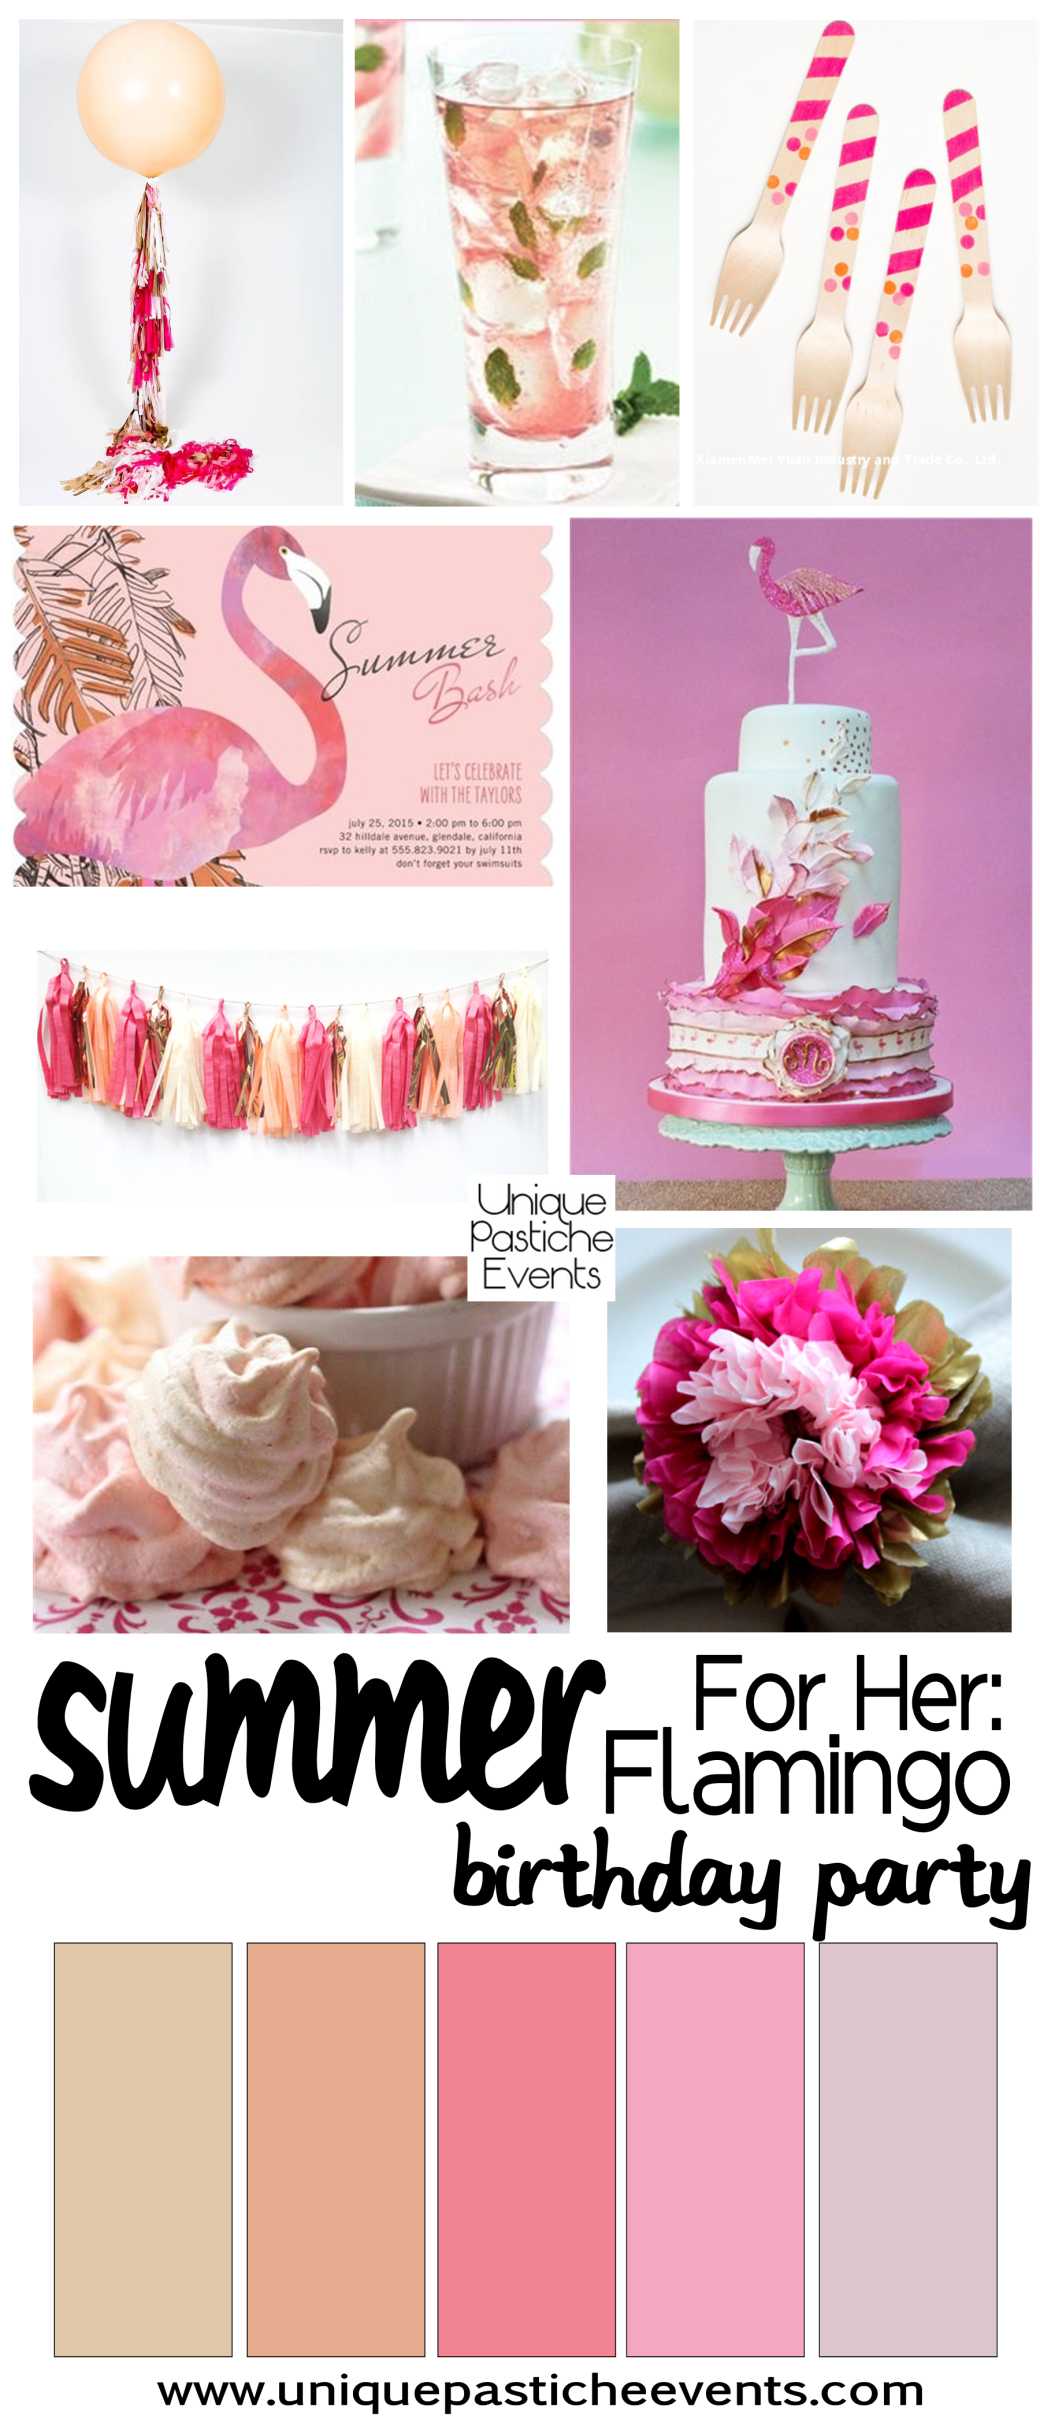 For Her: Flamingo Birthday Party